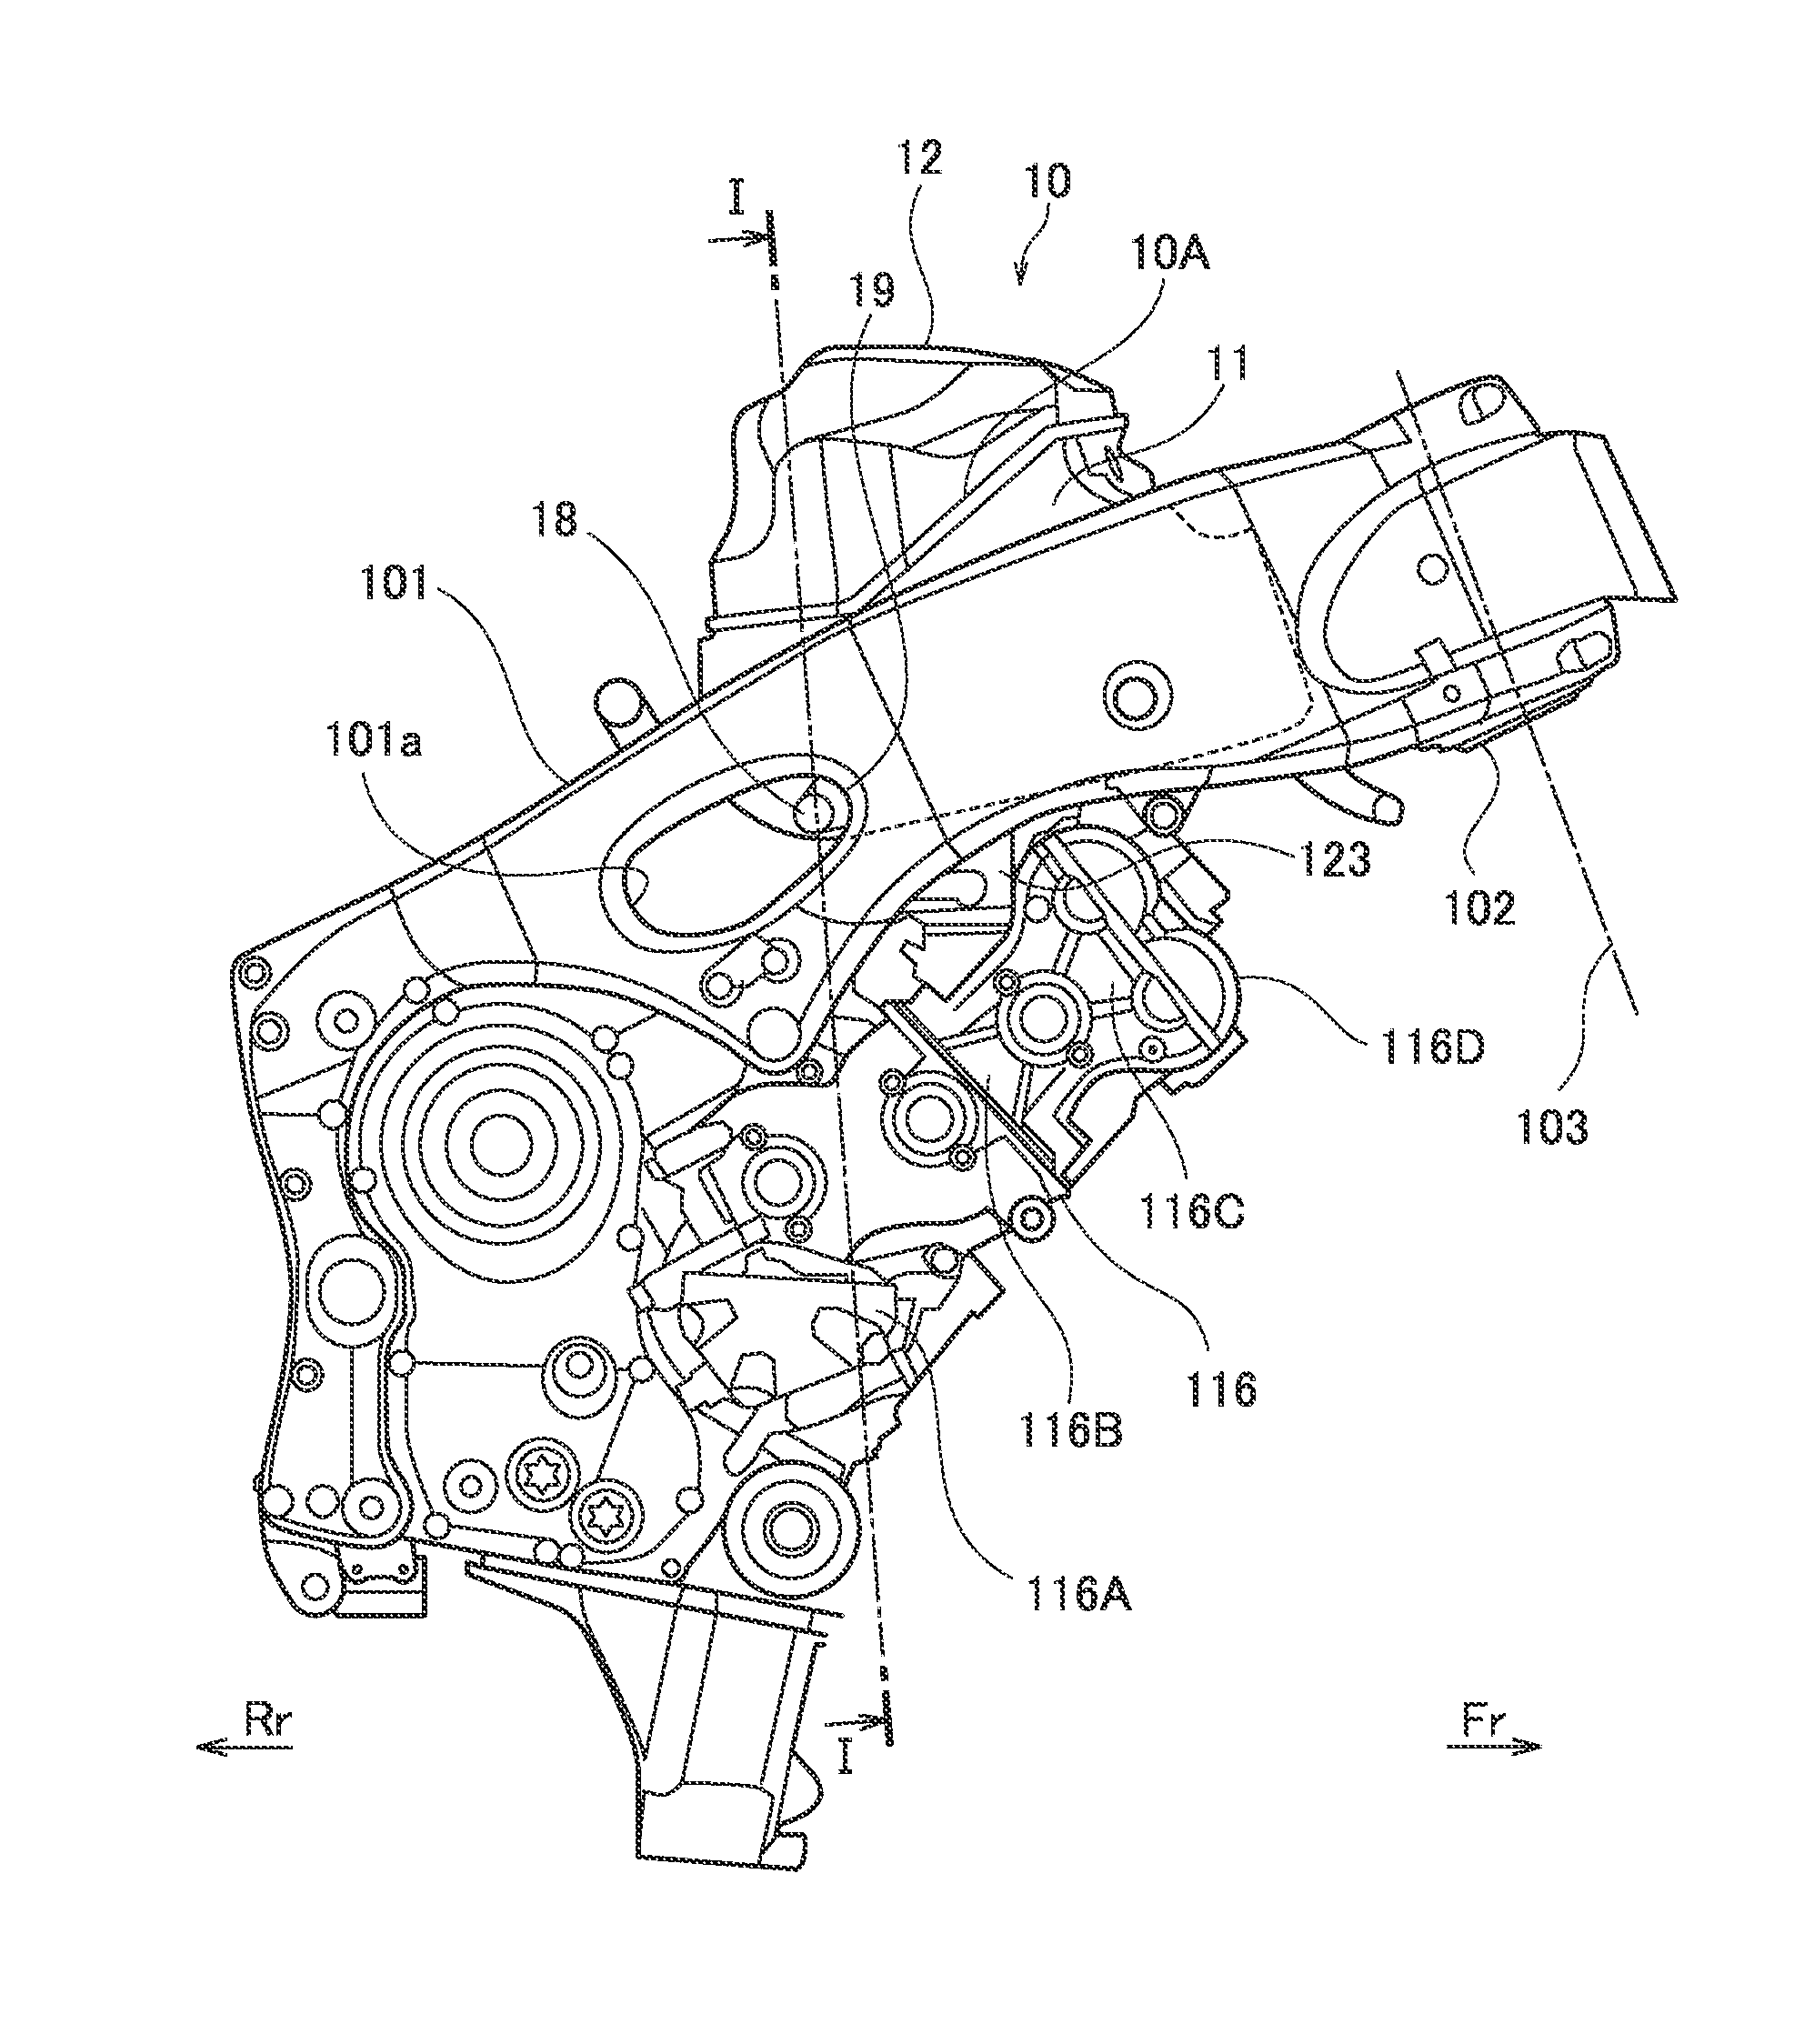 Fuel supply apparatus of internal combustion engine